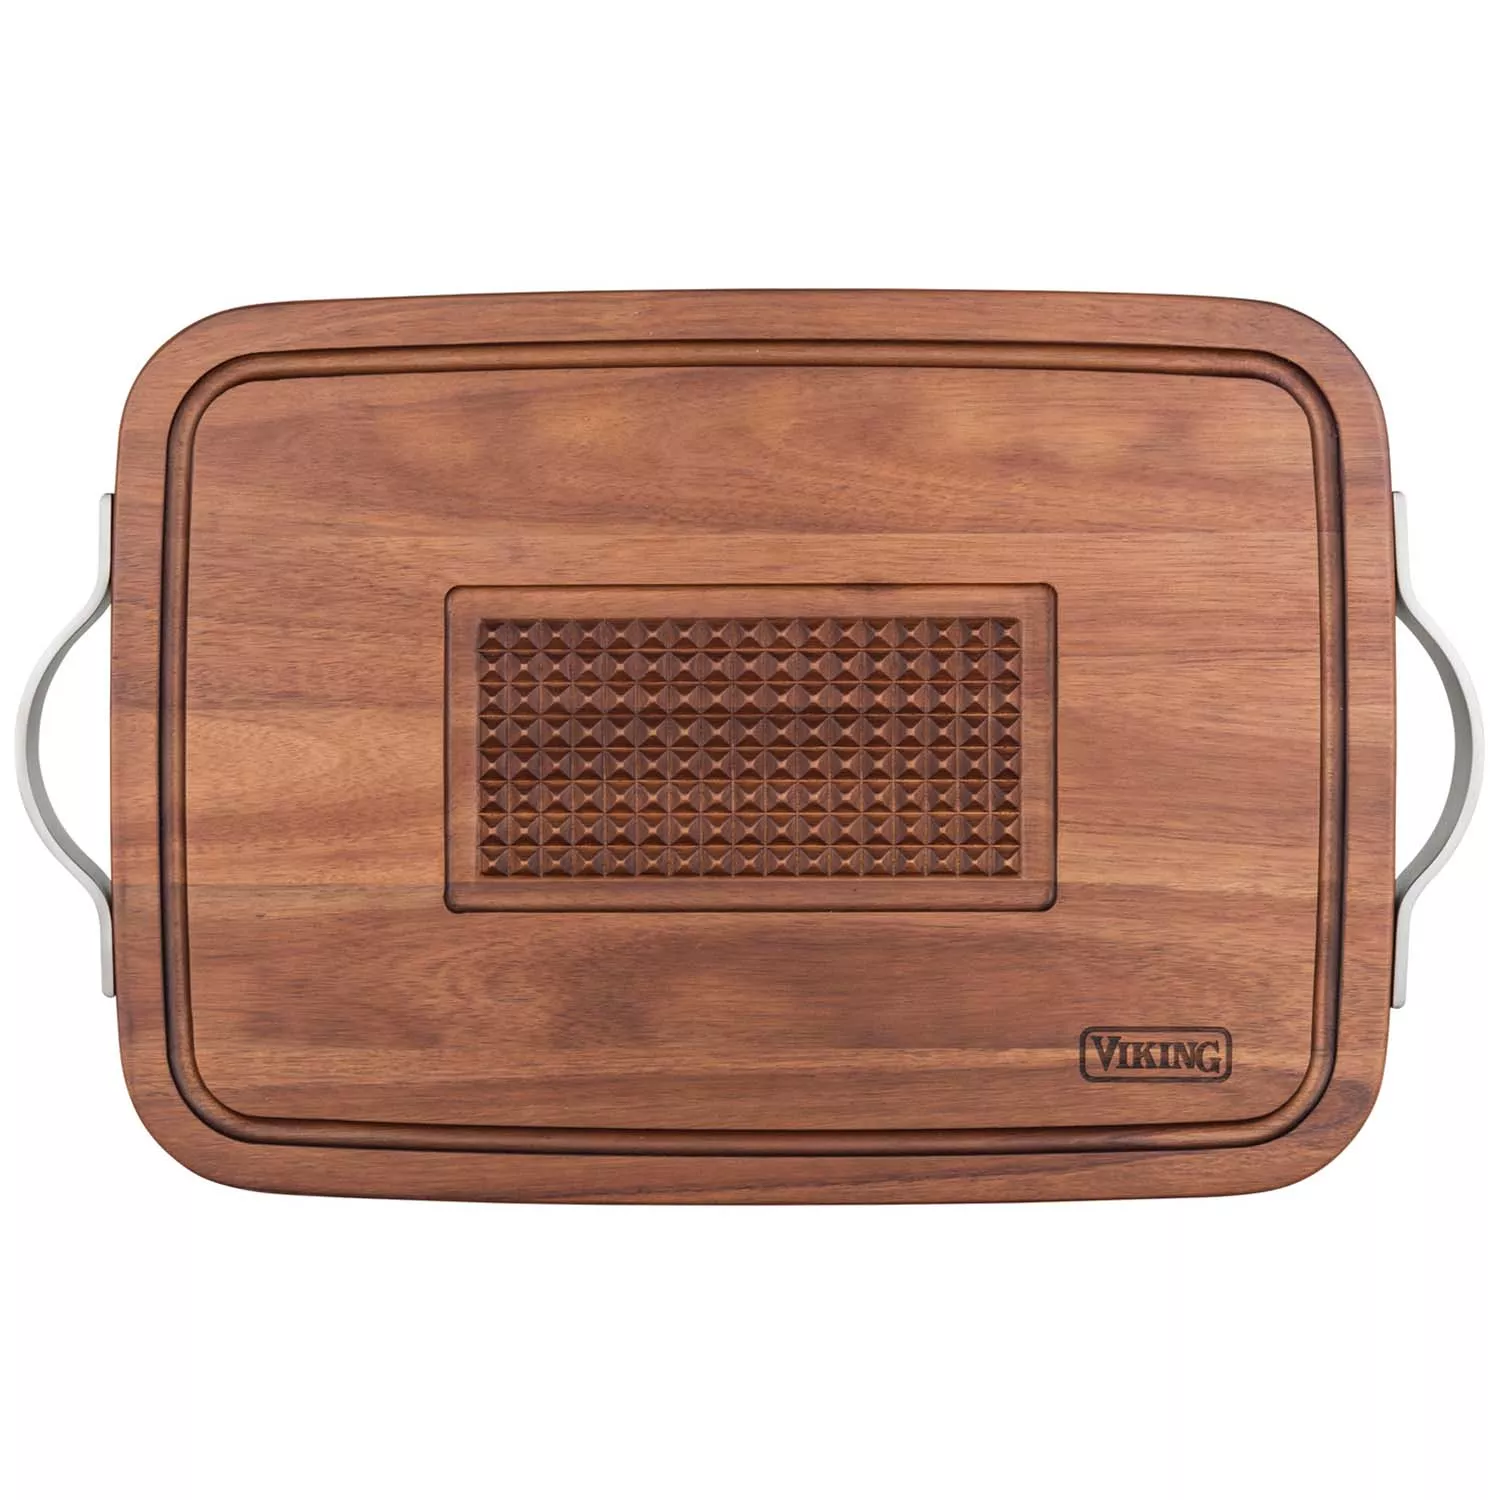 Best Over the Stove Cutting Boards: A Fabulous Option! - Fat Kid Deals